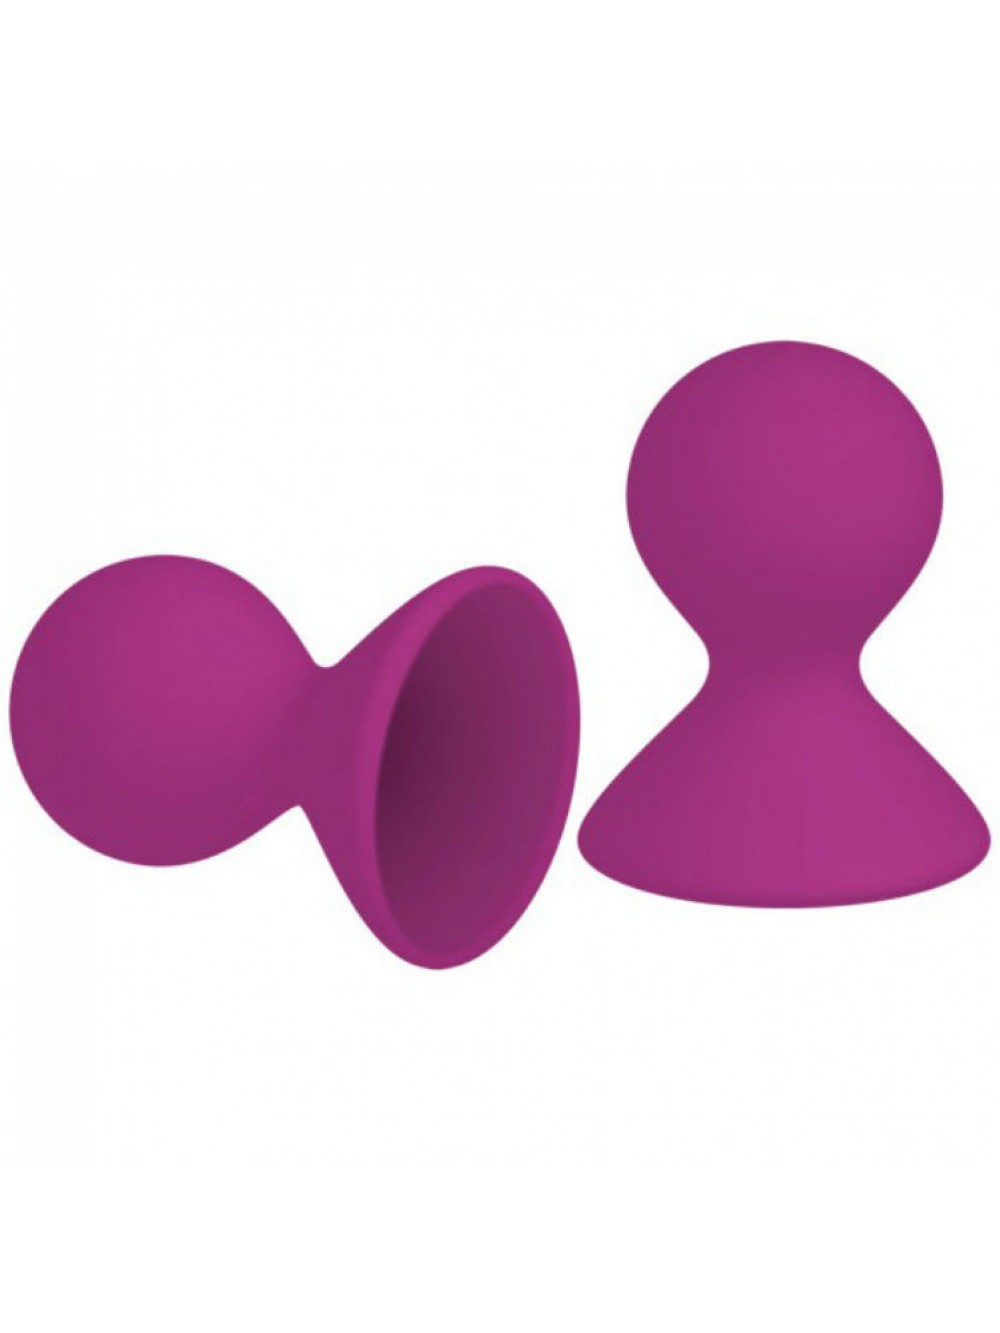 SEVENCREATIONS DUAL MASSEUSE SILICONE NIPPLE SUCKERS 2 PACK 5060365096259